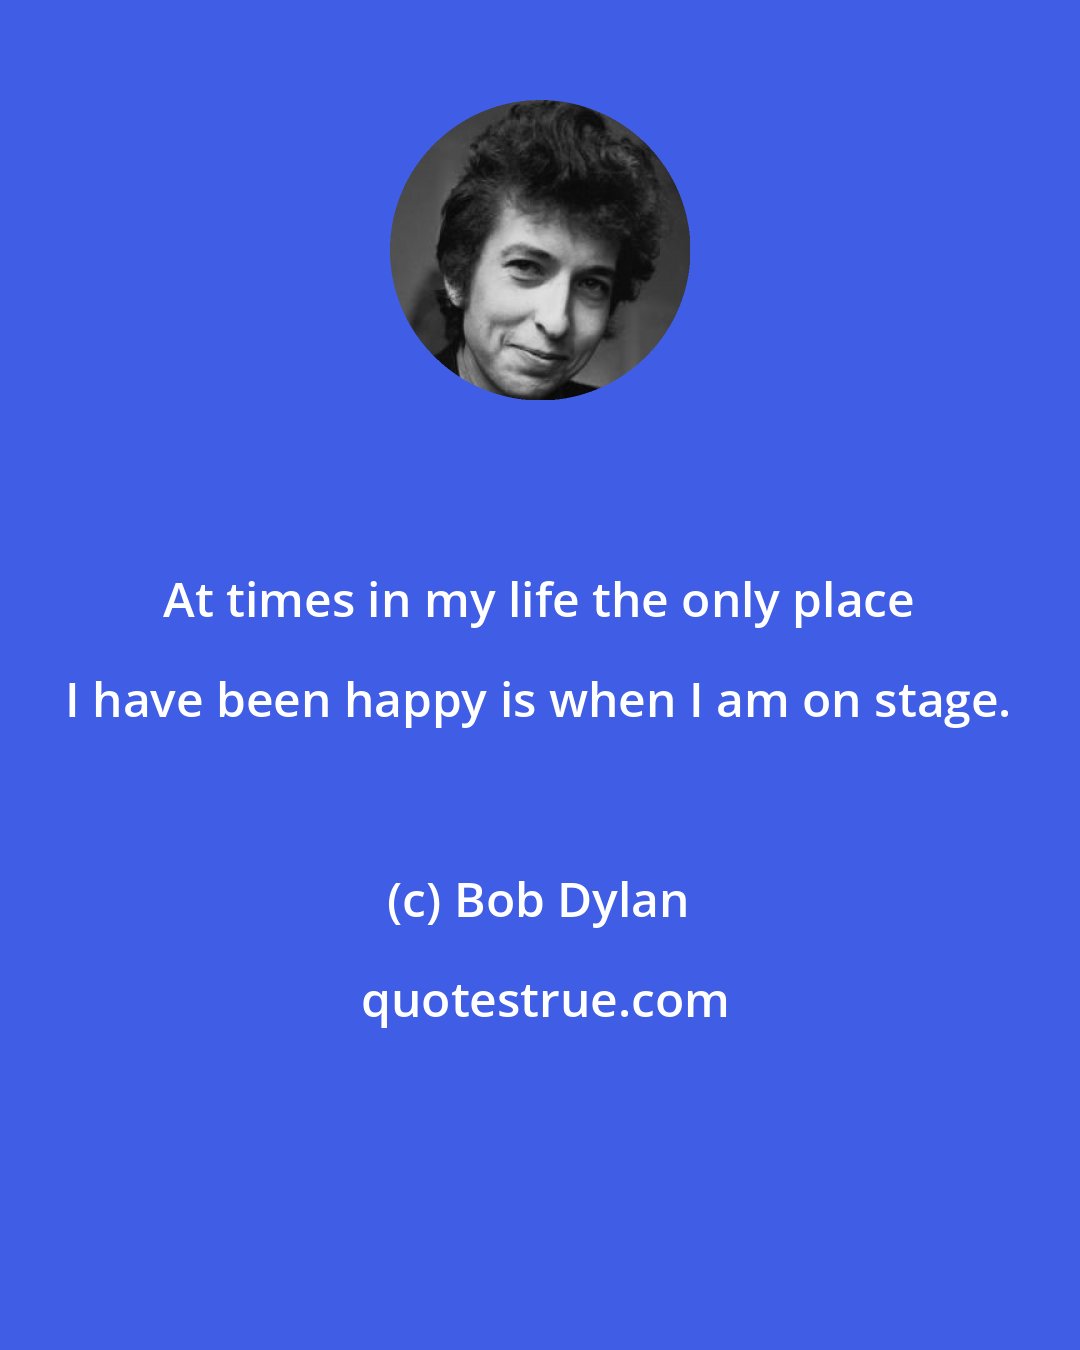 Bob Dylan: At times in my life the only place I have been happy is when I am on stage.